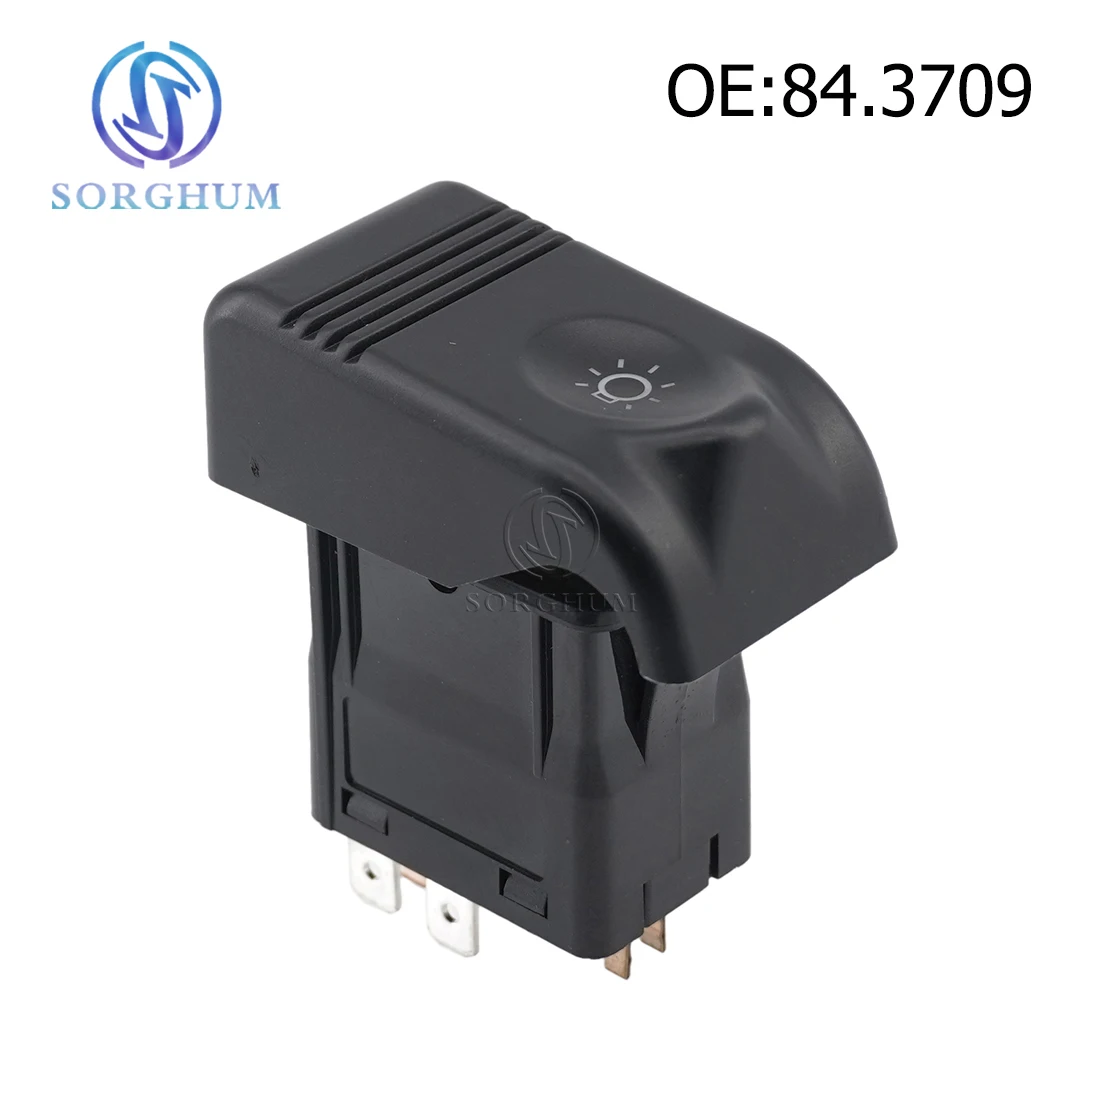 

Sorghum 2-24B 84.3709 Ty 37003 1211-86 ВАЗ-2110 Auto Head Light Switch Button 10 Pins For LAD A0505 Car Accessries